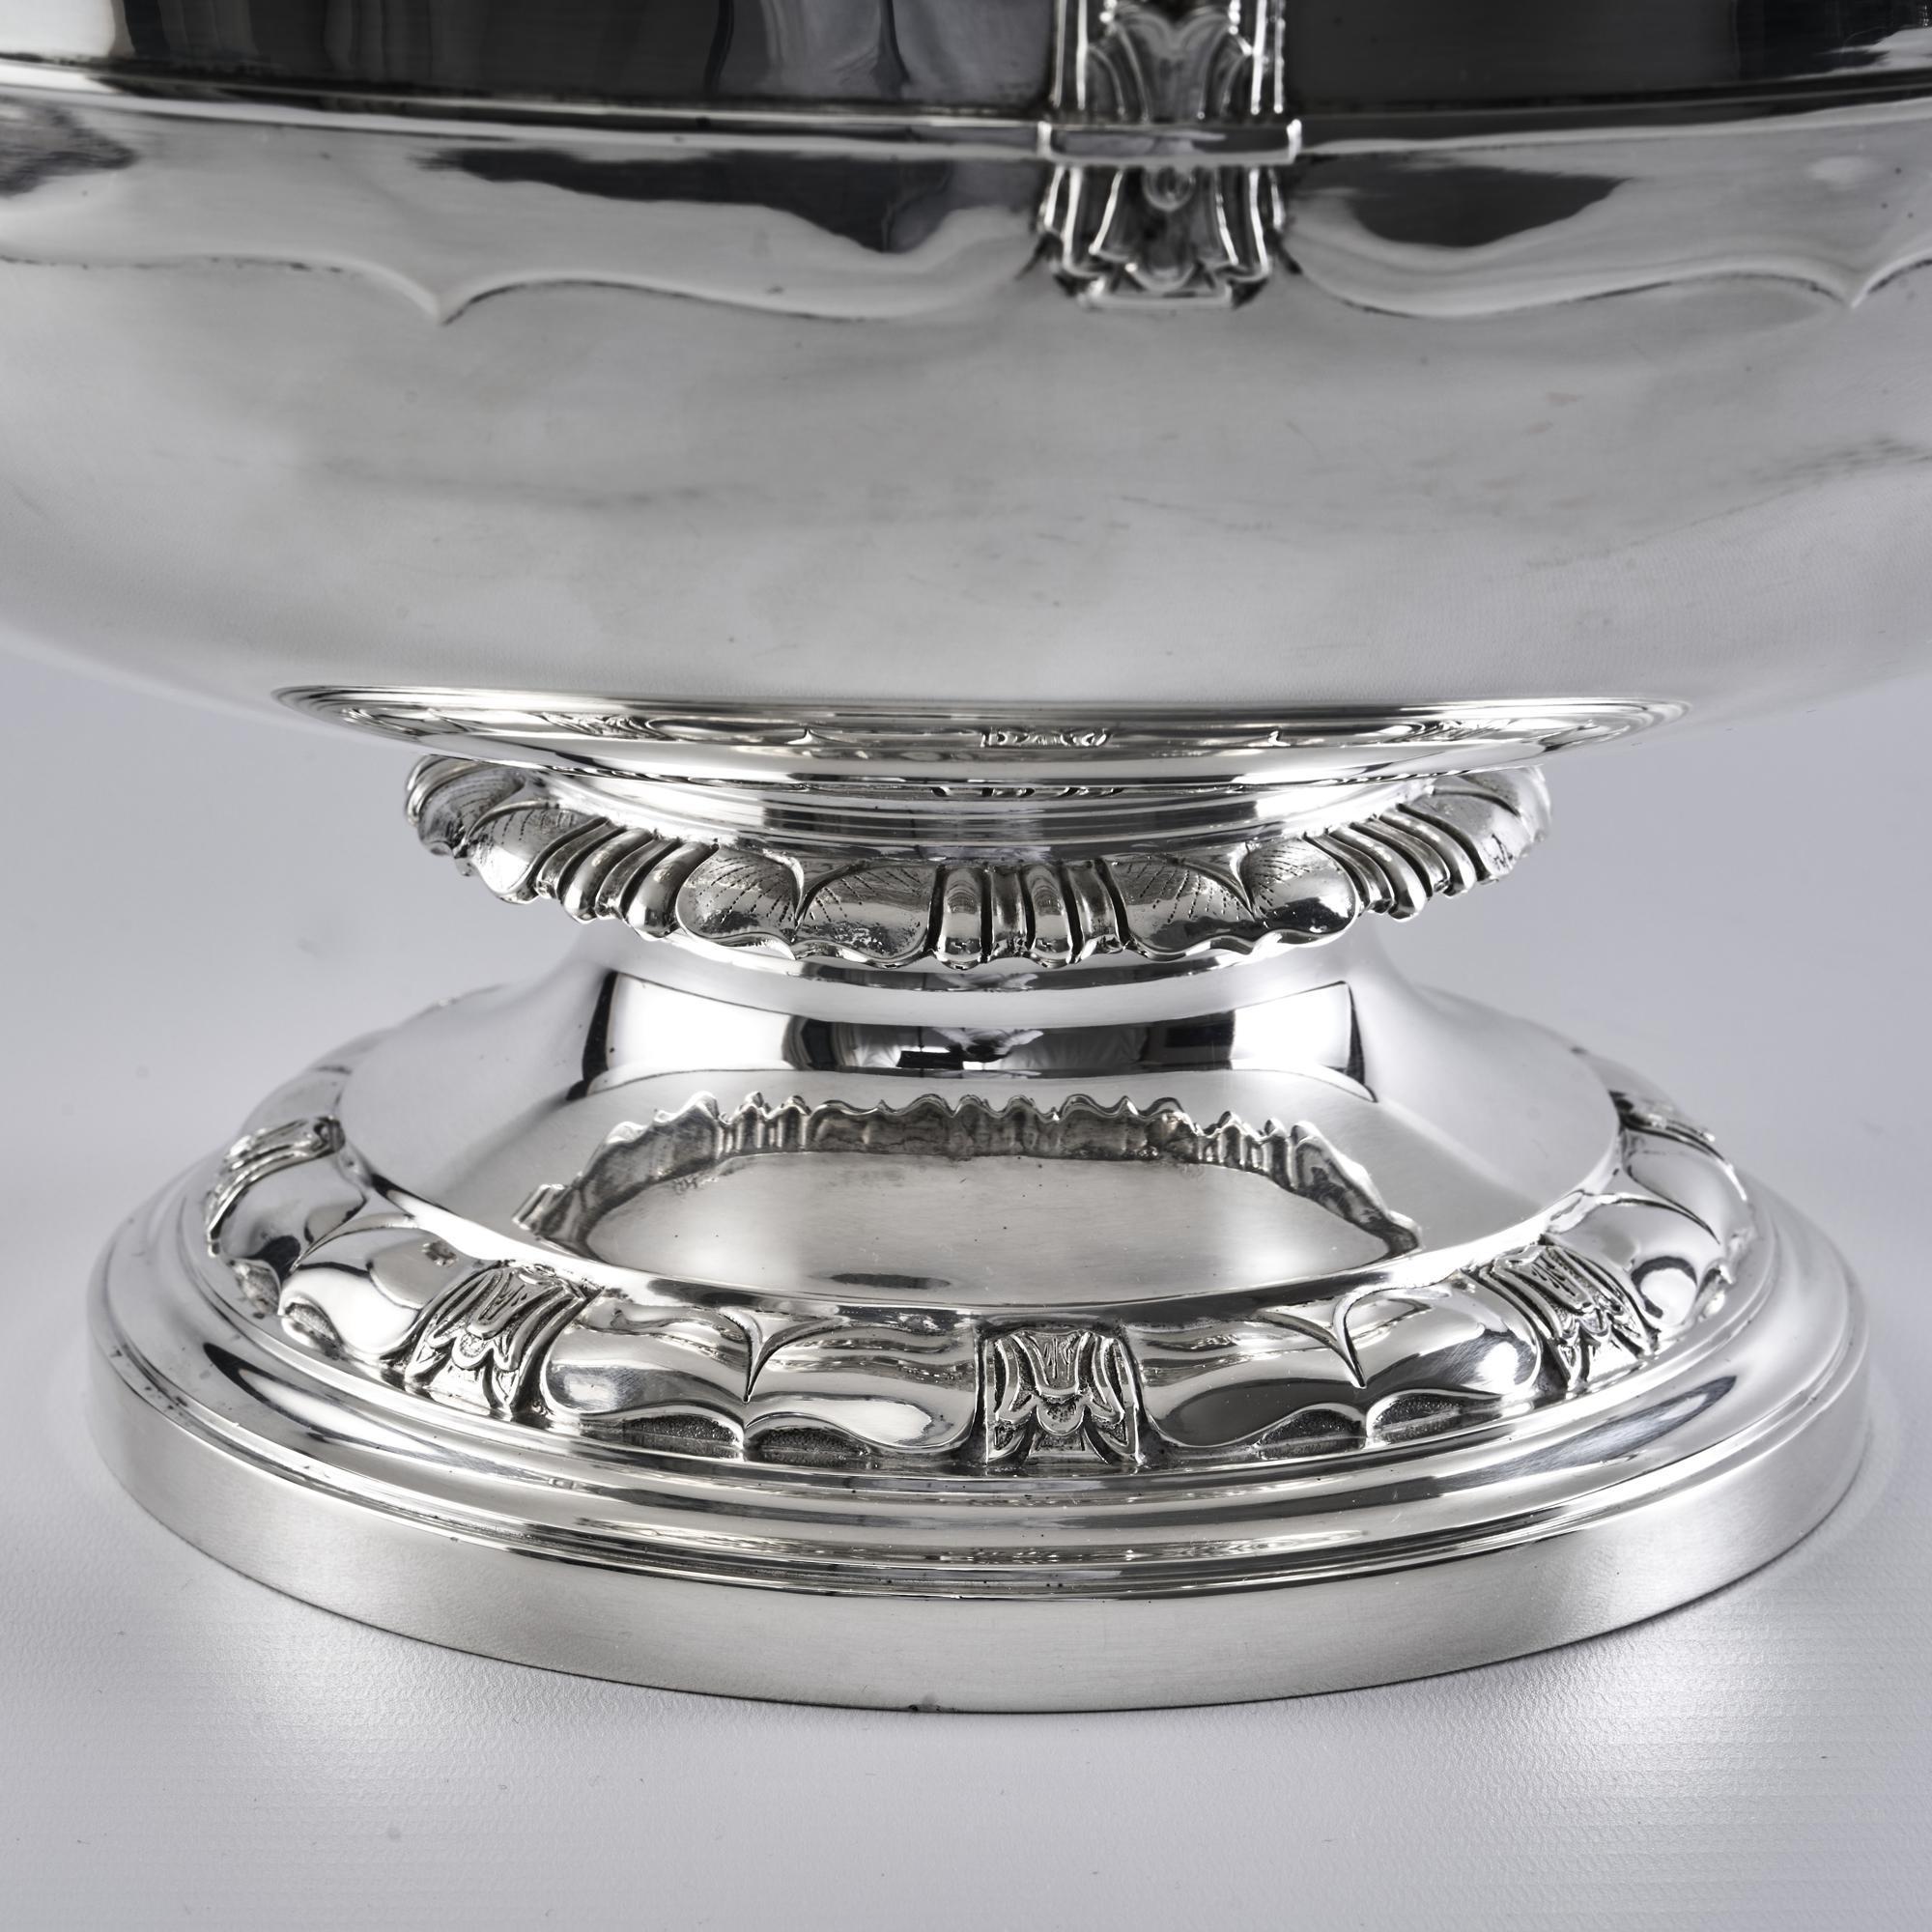 Excellent, large Art Deco style silver bowl centrepiece suitable either for displaying fruit or flowers but it would also make a fabulous presentation piece. 

The Art Deco styling and motifs can be seen around the body and base, as well as on the